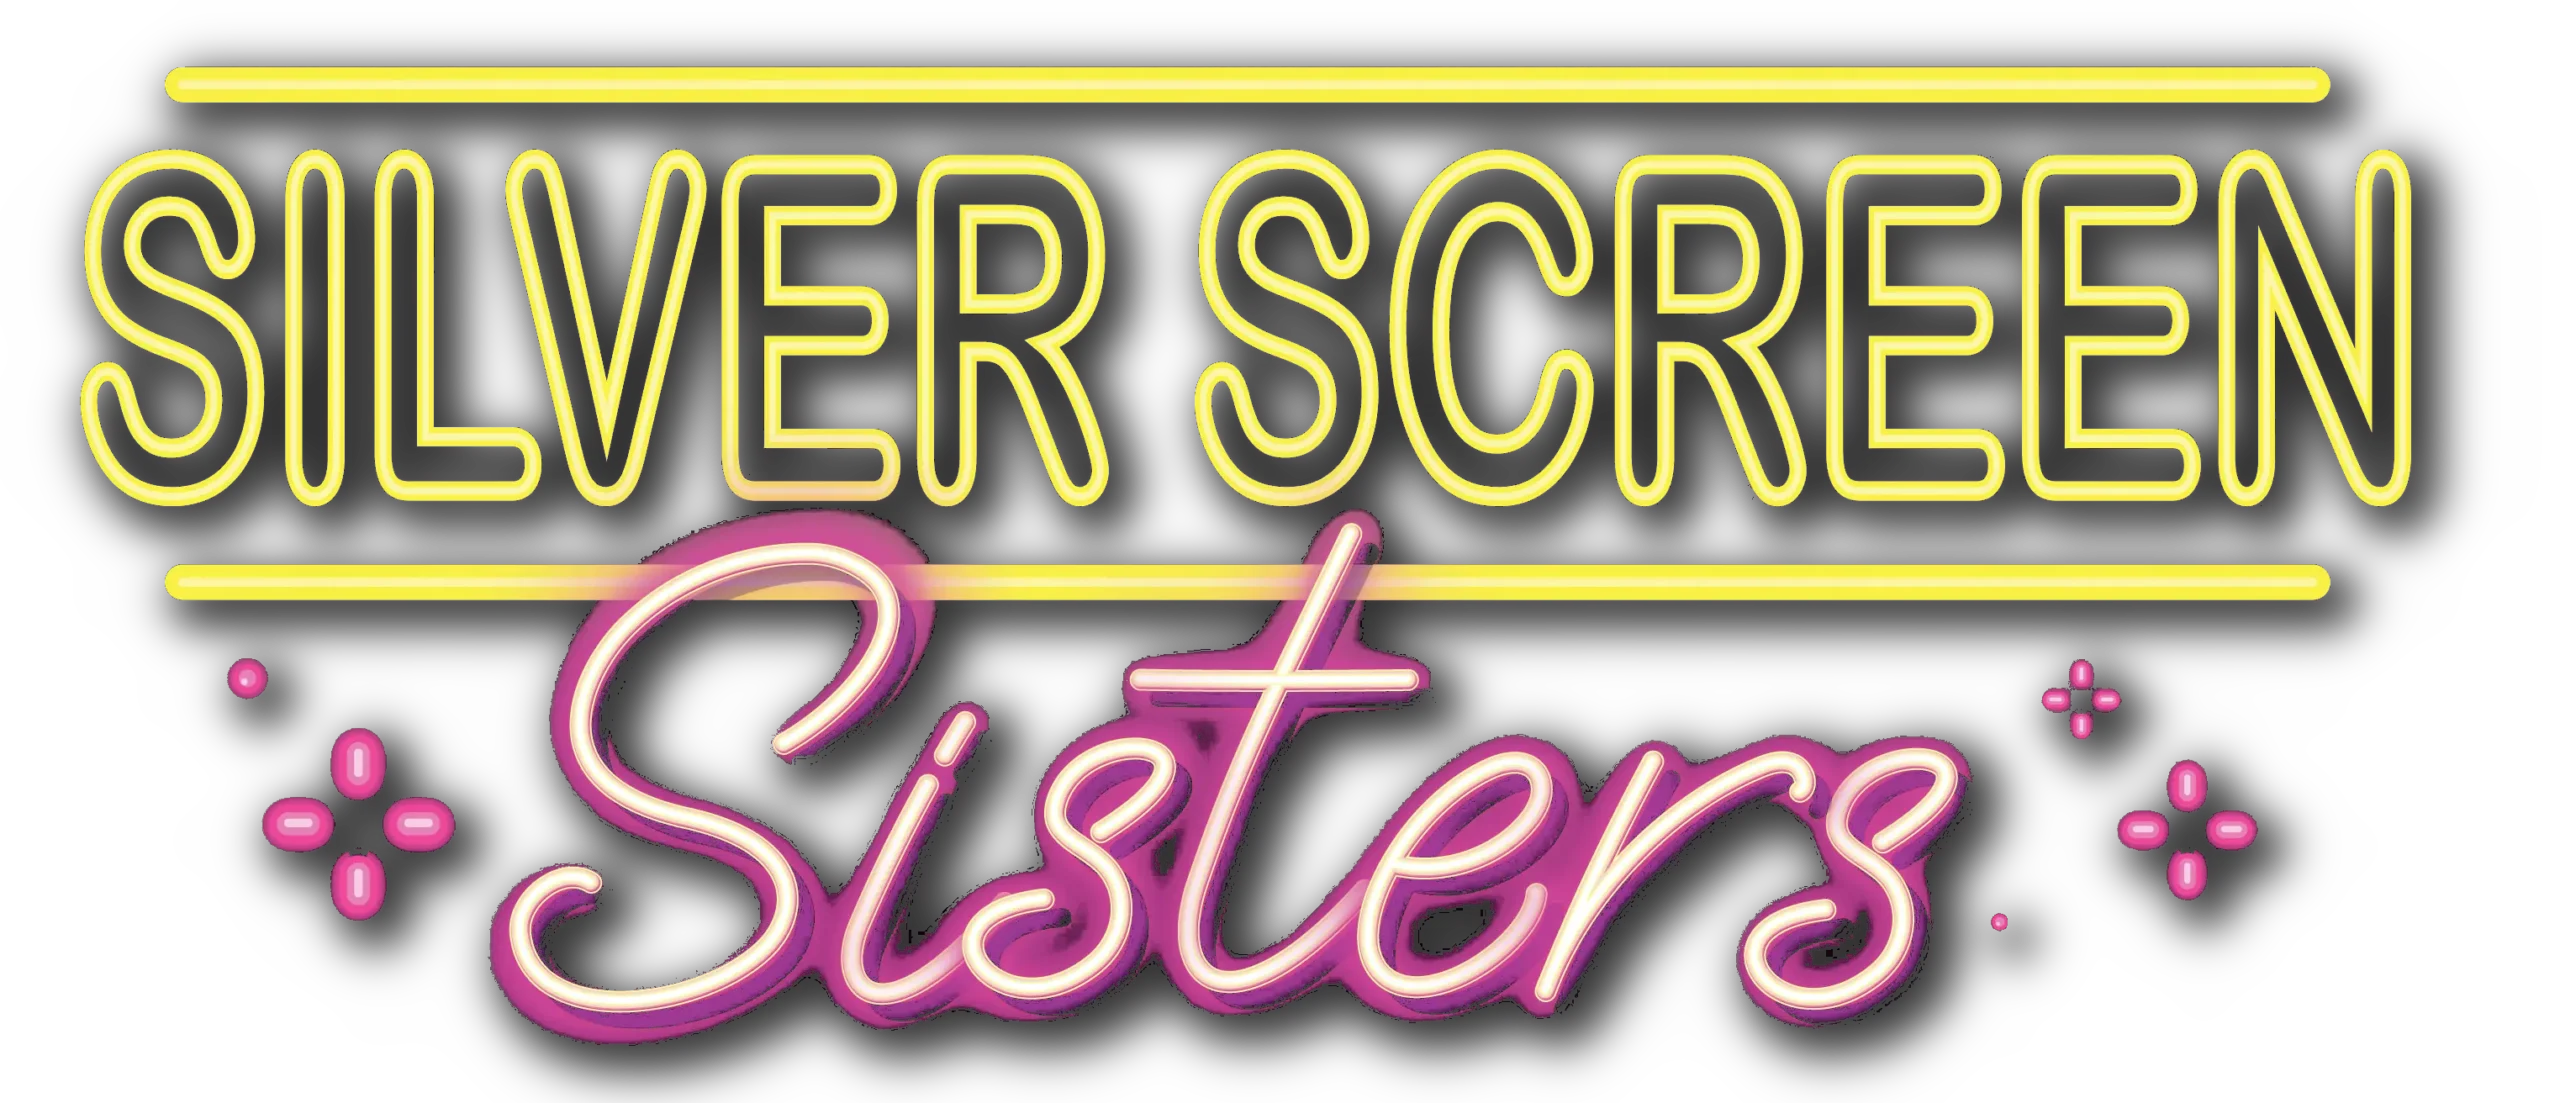 Silver Screen Sisters – 80s Movie Review !